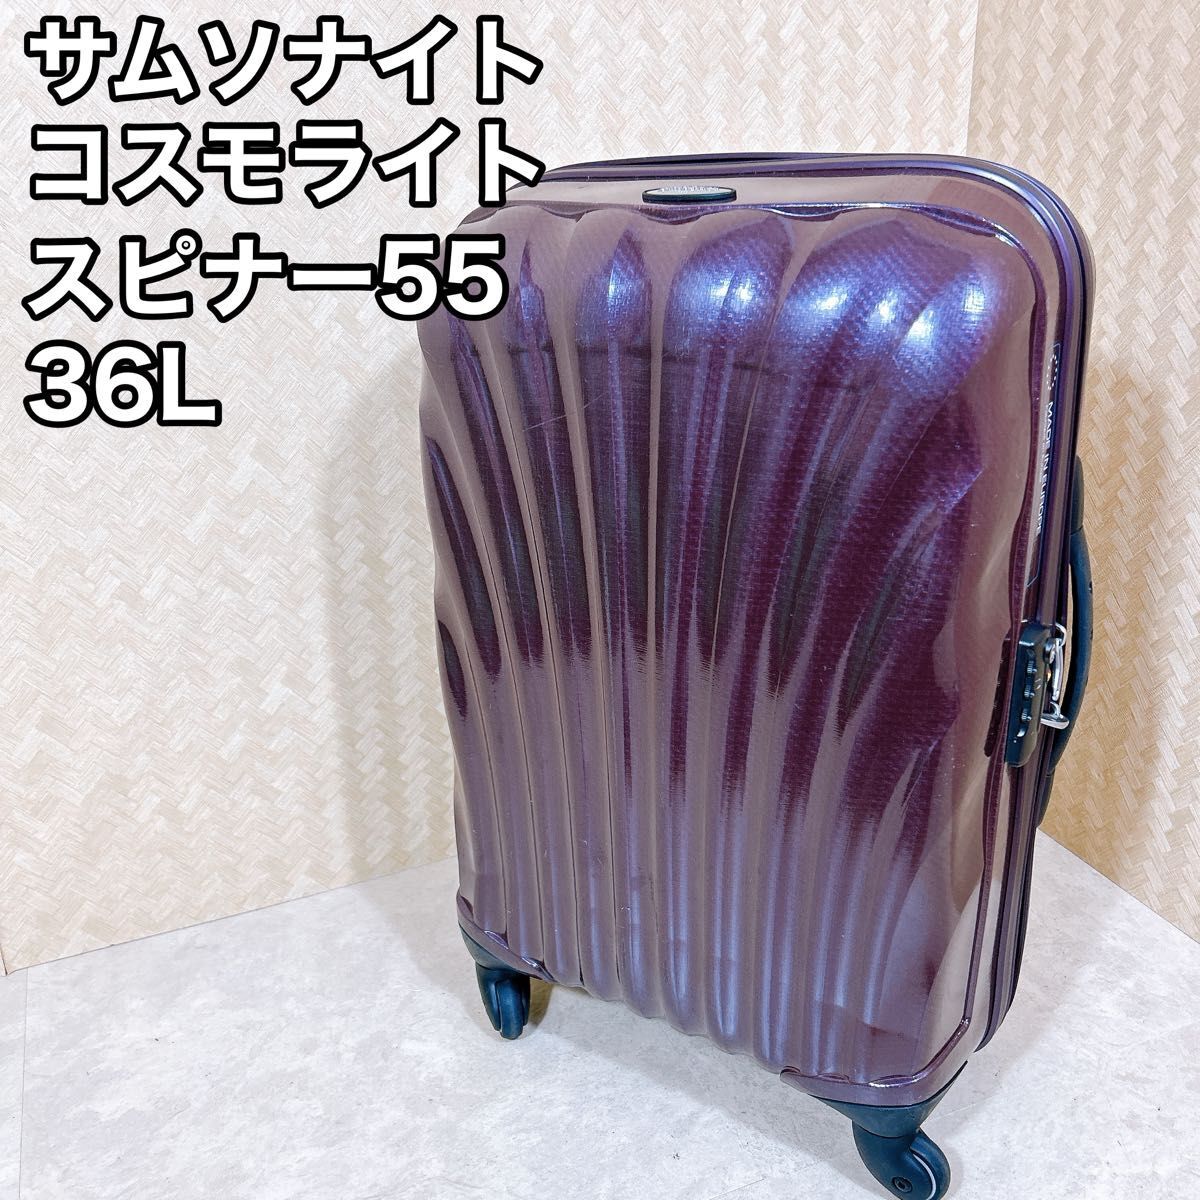  superior article Samsonite Cosmo light spinner Carry case 33L machine inside bring-your-own possible 